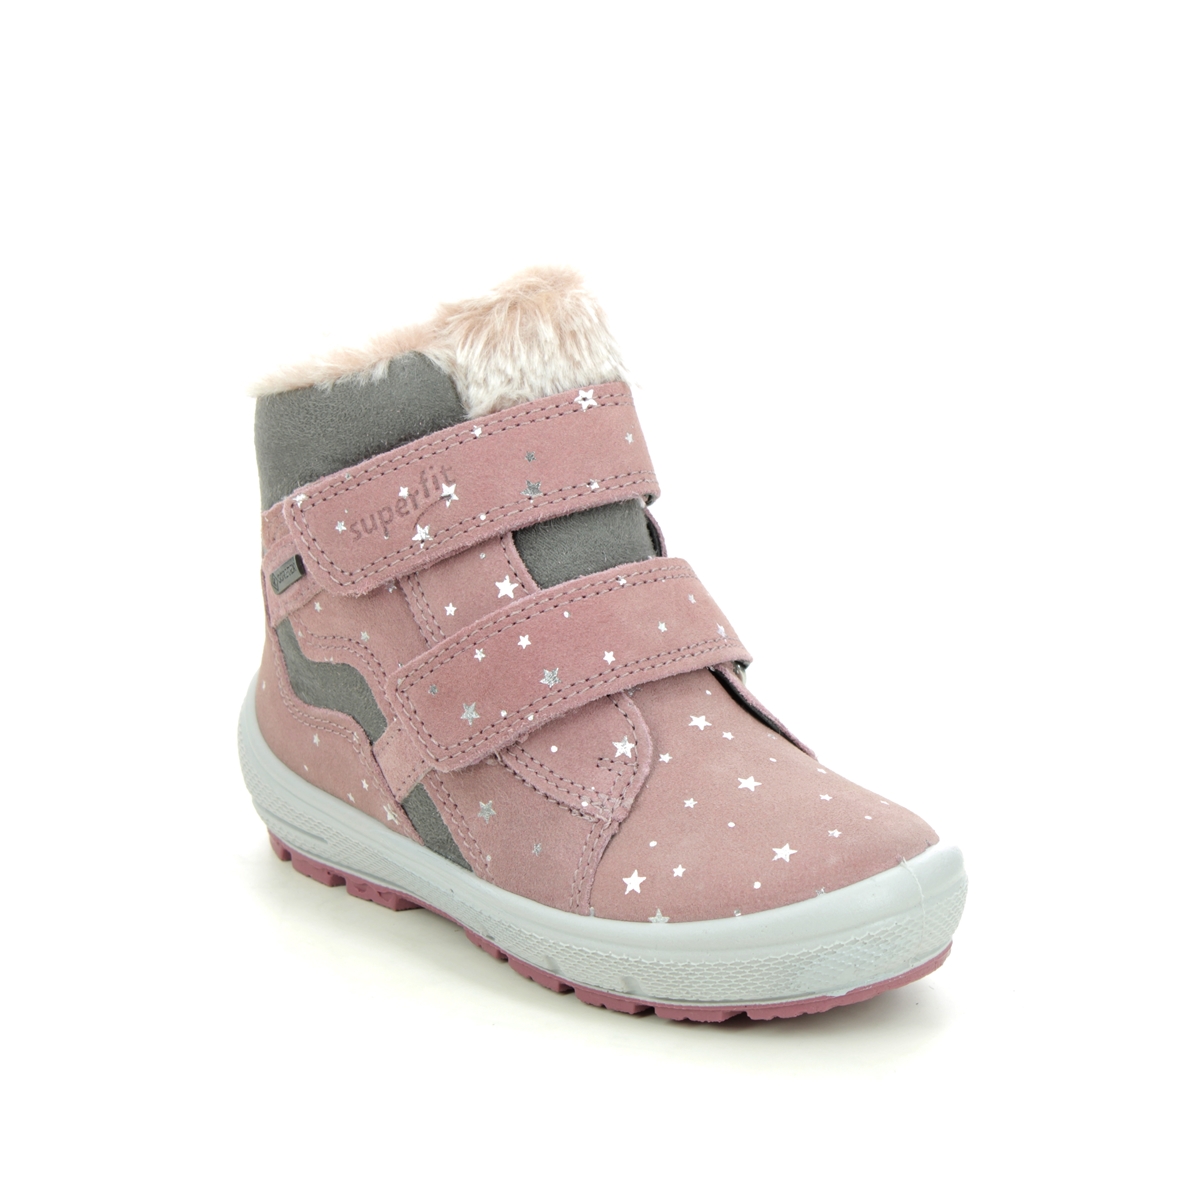 Superfit Groovy Gtx Pink Leather Kids Toddler Girls Boots 1006316-5500 In Size 22 In Plain Pink Leather